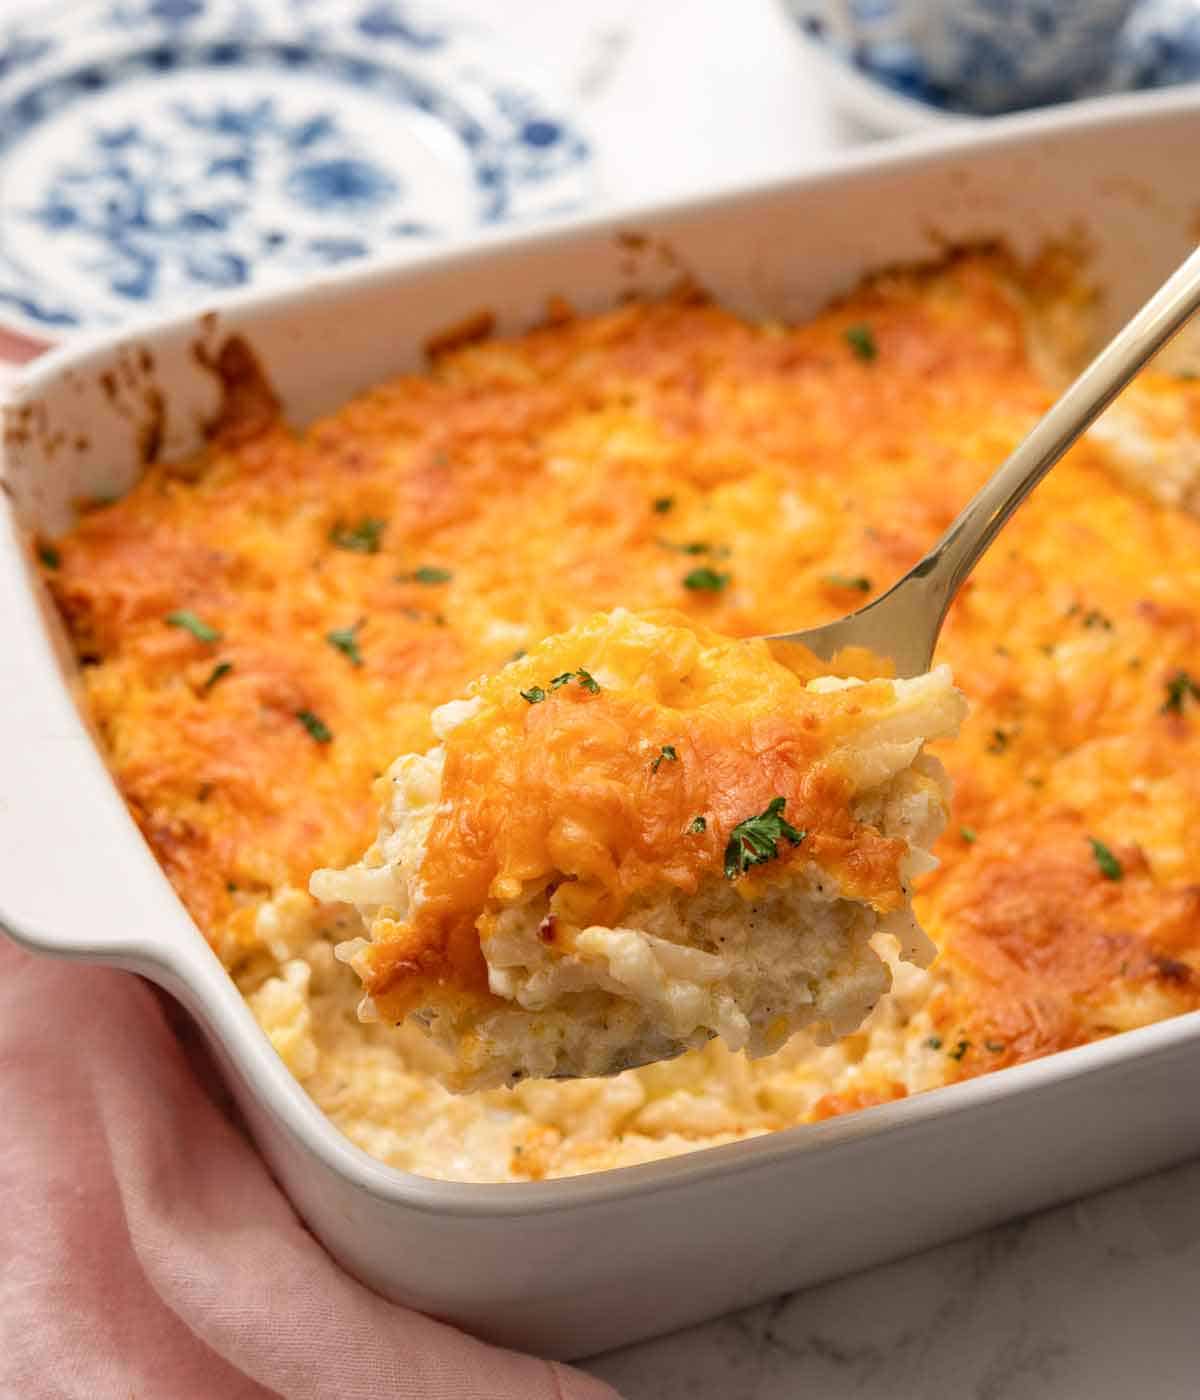 A spoonful of hashbrown casserole lifted from a baking dish.